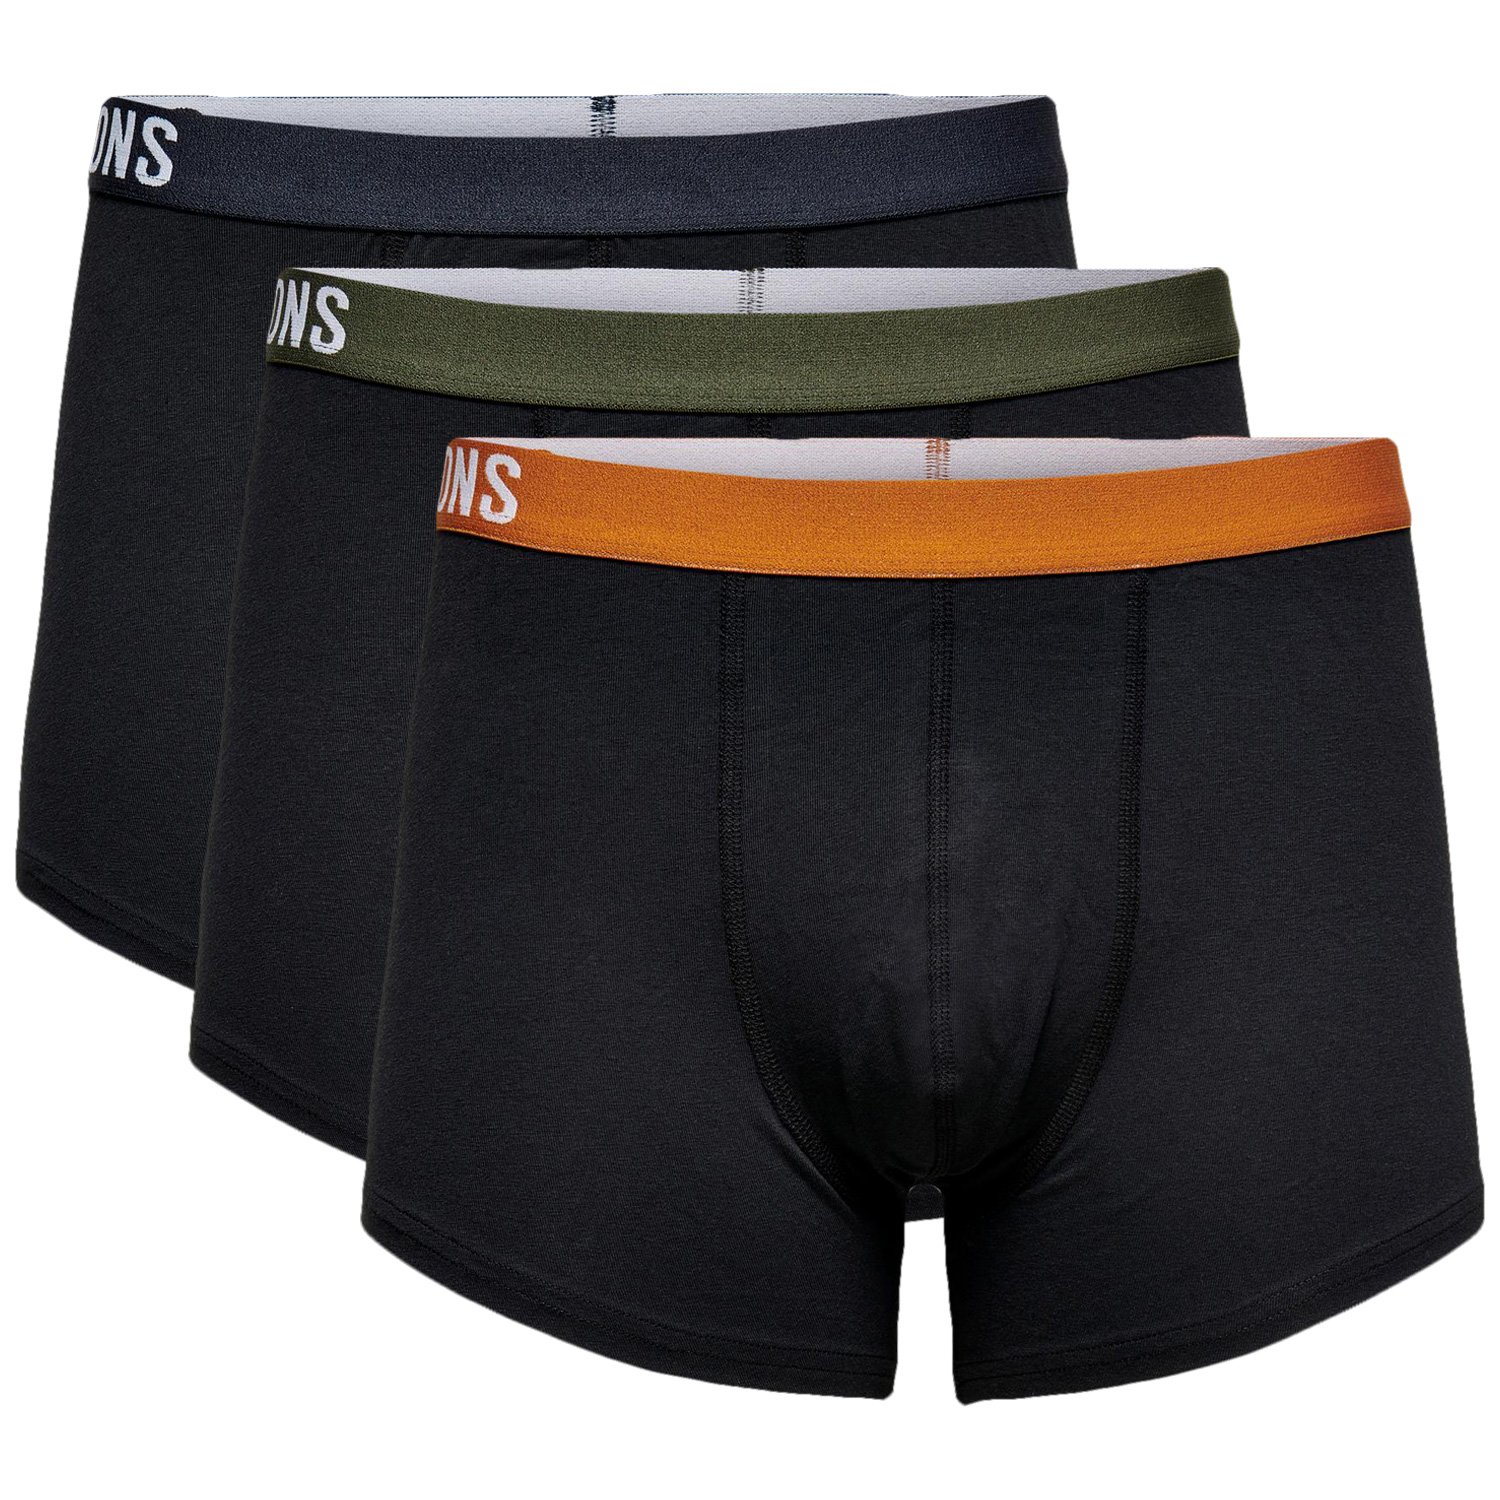 Only & Sons Mens Boxers Fitz 3 Pack Underwear Stretchy Material Cotton  Blend